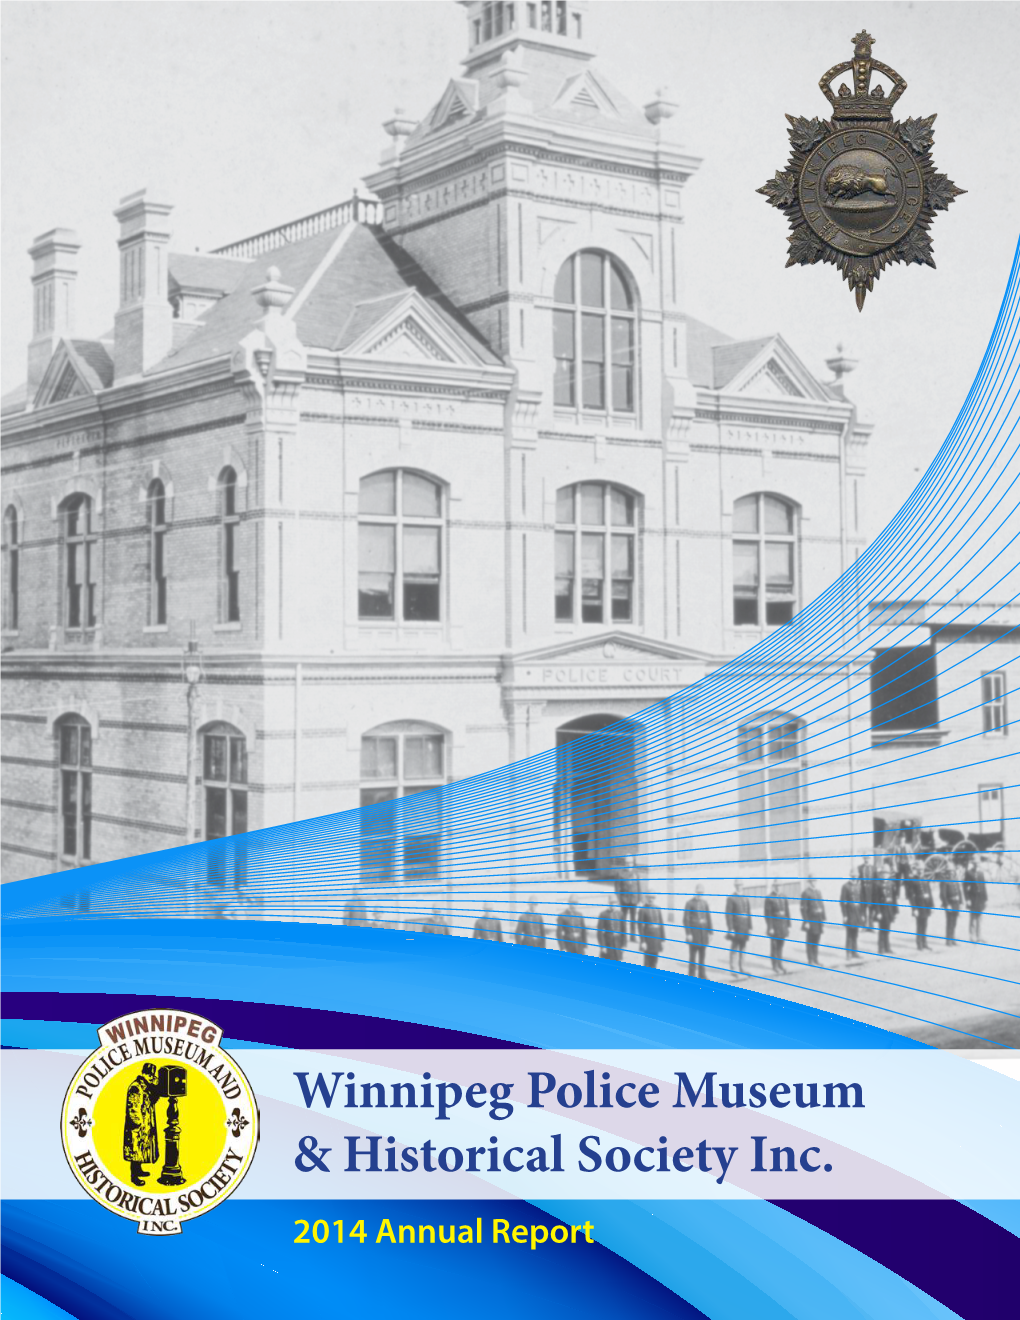 2014 Annual Report the Winnipeg Police Museum Is Contacted Regularly Through Our Online Web Pages by Families Conducting Genealogical Research